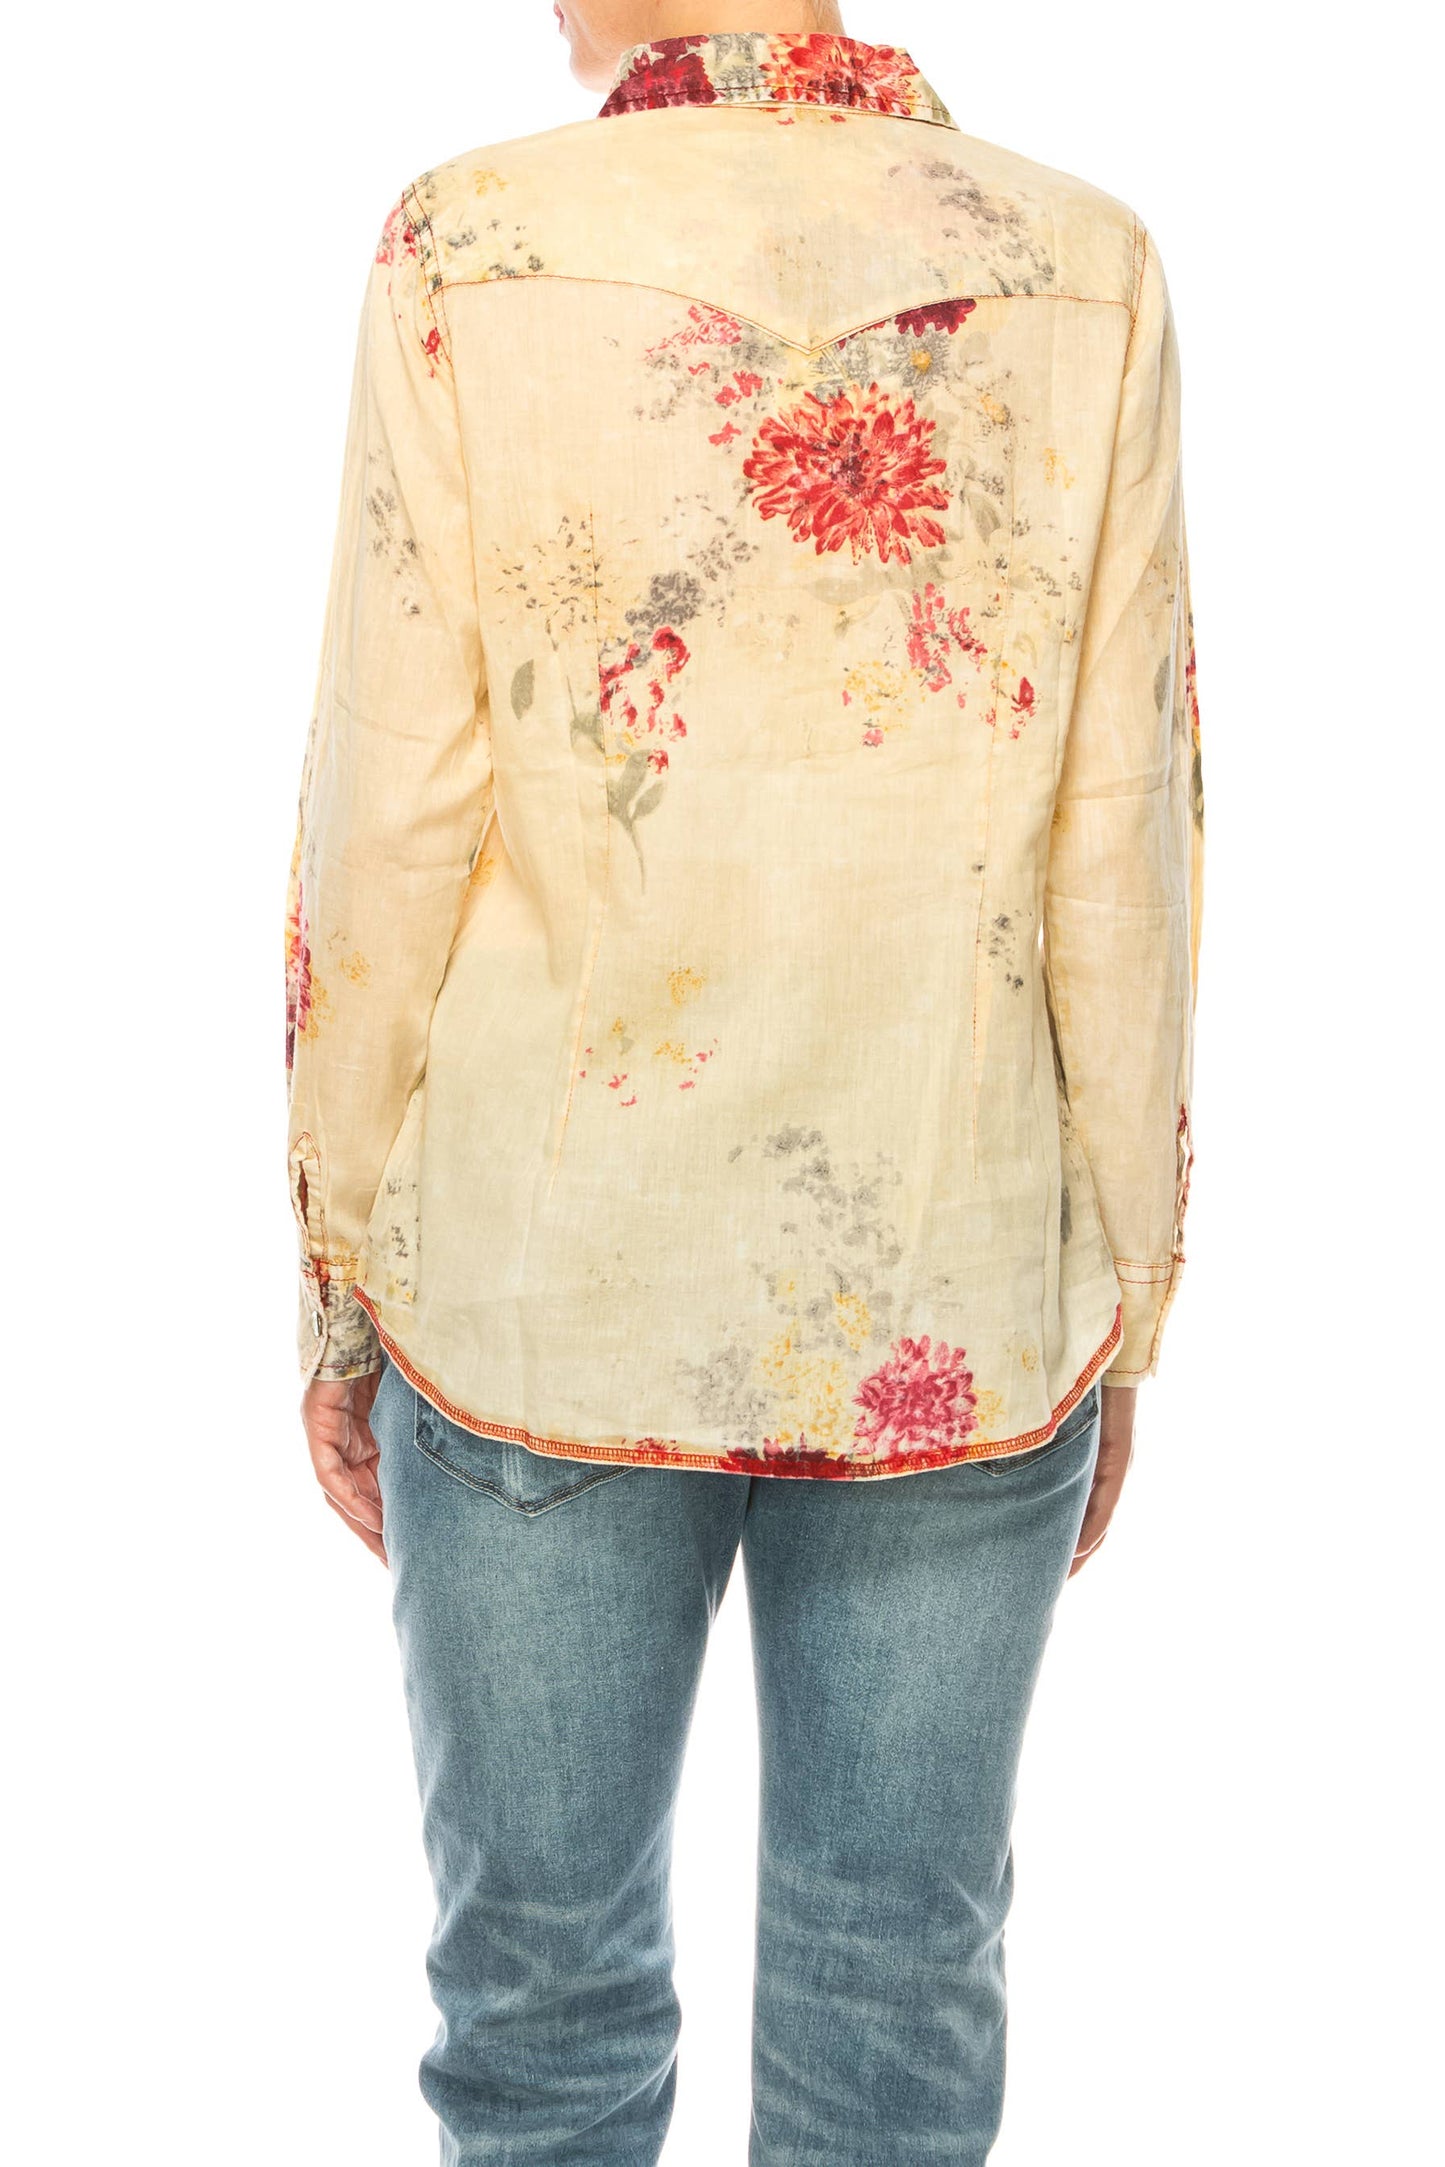 Magazine Clothing - Taupe Floral Button Down Western Shirt: X-Large